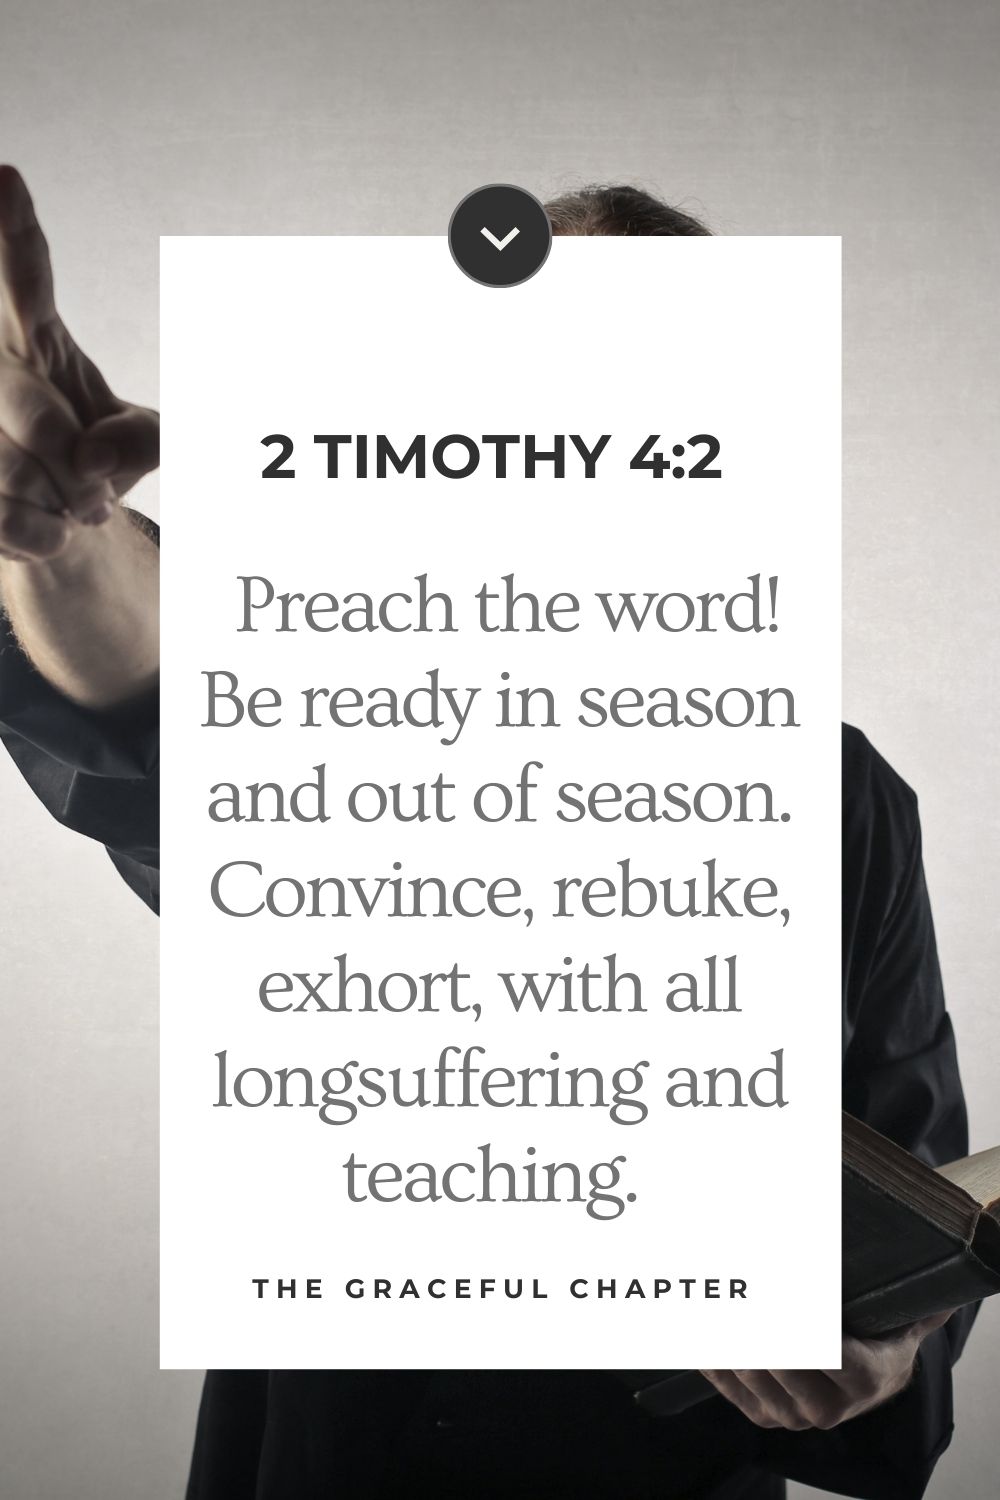  Preach the word! Be ready in season and out of season. Convince, rebuke, exhort, with all longsuffering and teaching. 